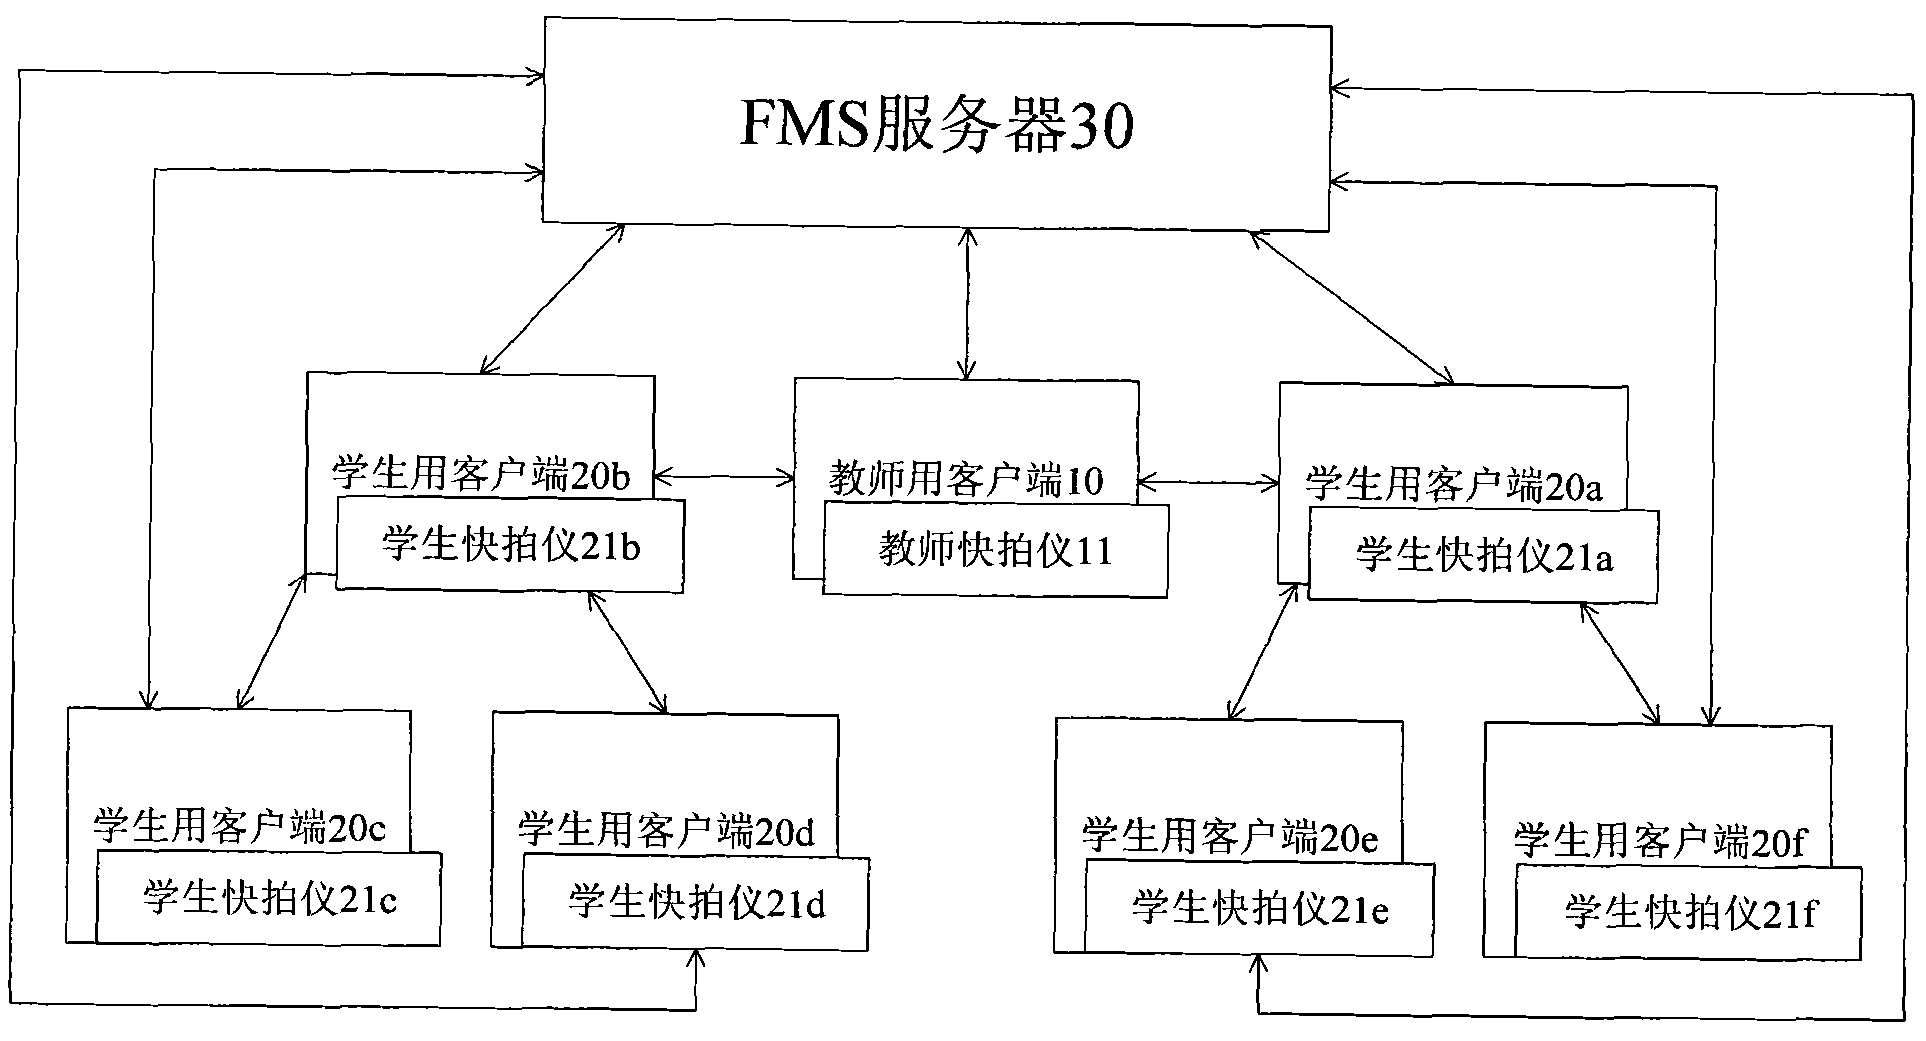 Information interaction method for teaching